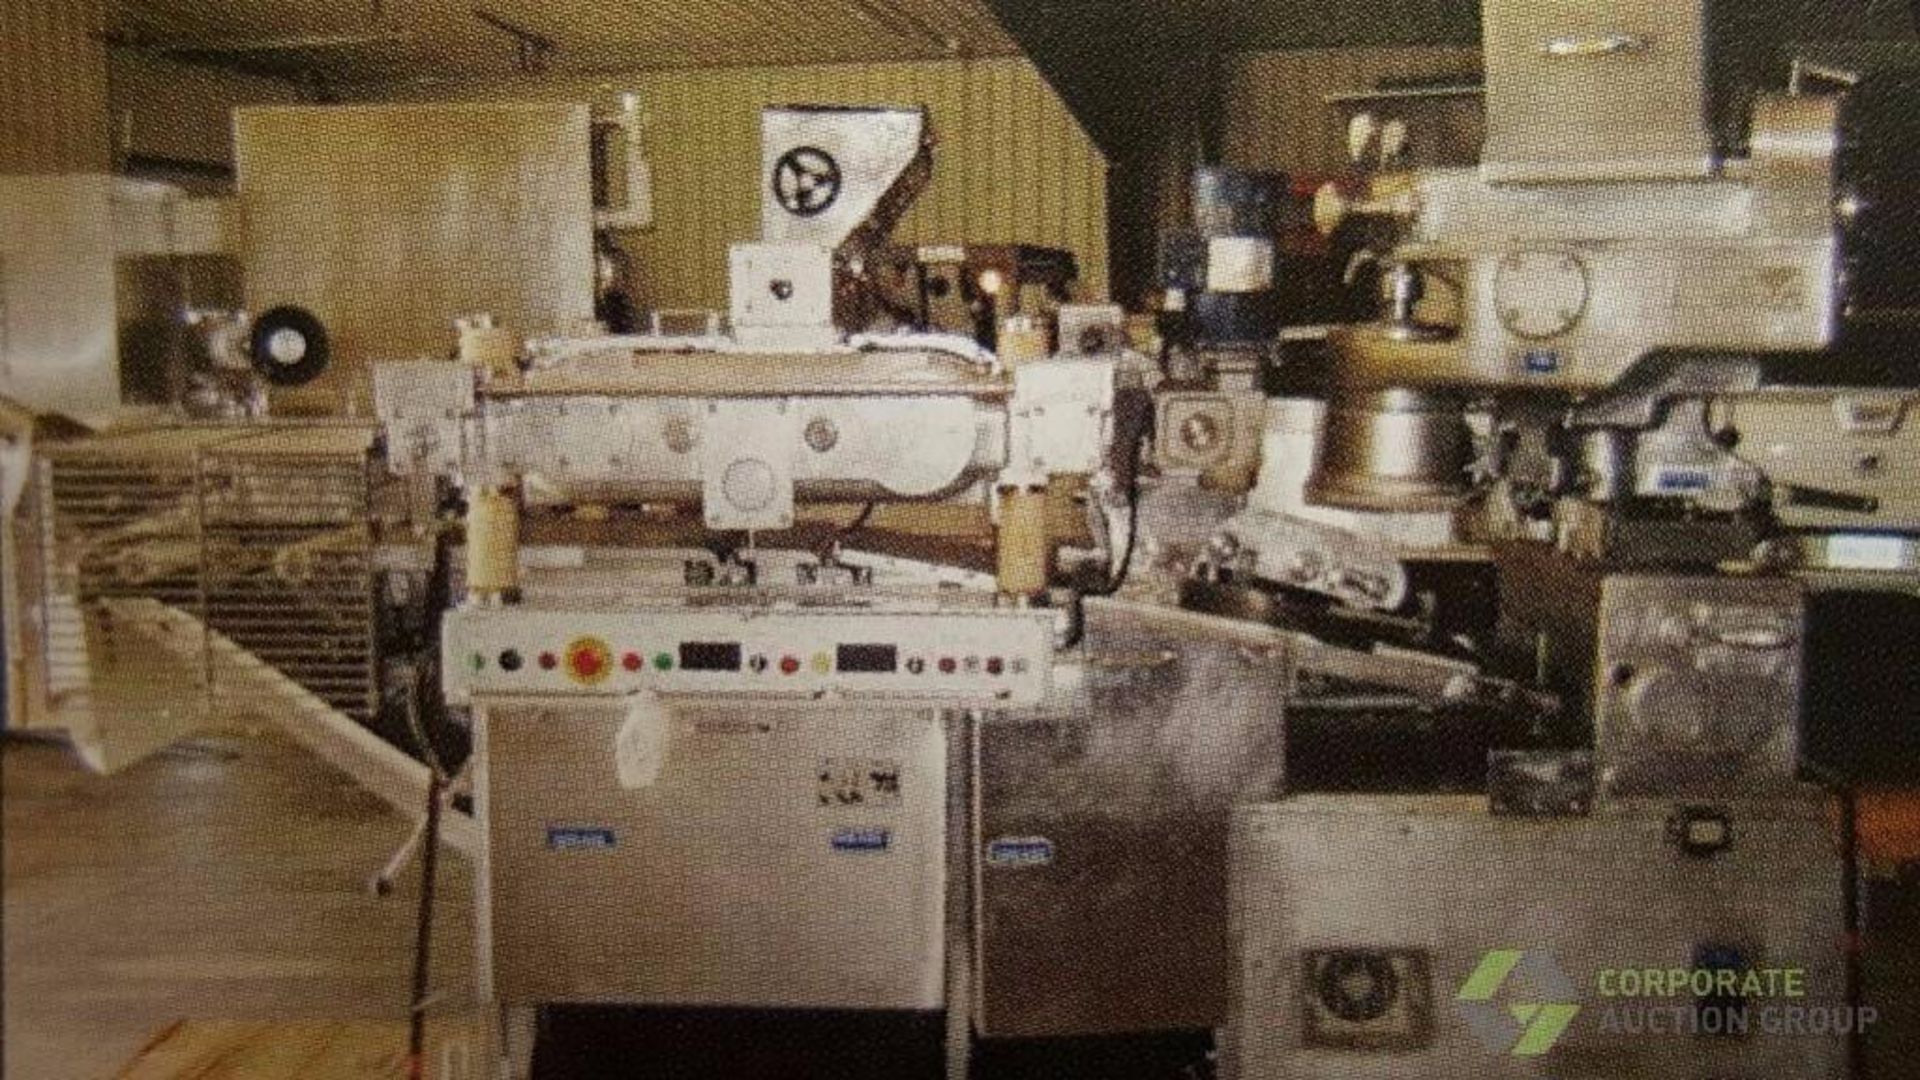 1987 Rheon Laminator/Sheeter, Model: MM 303, S/N: 97, 7.985kw motor, Includes Extruder capable of 30